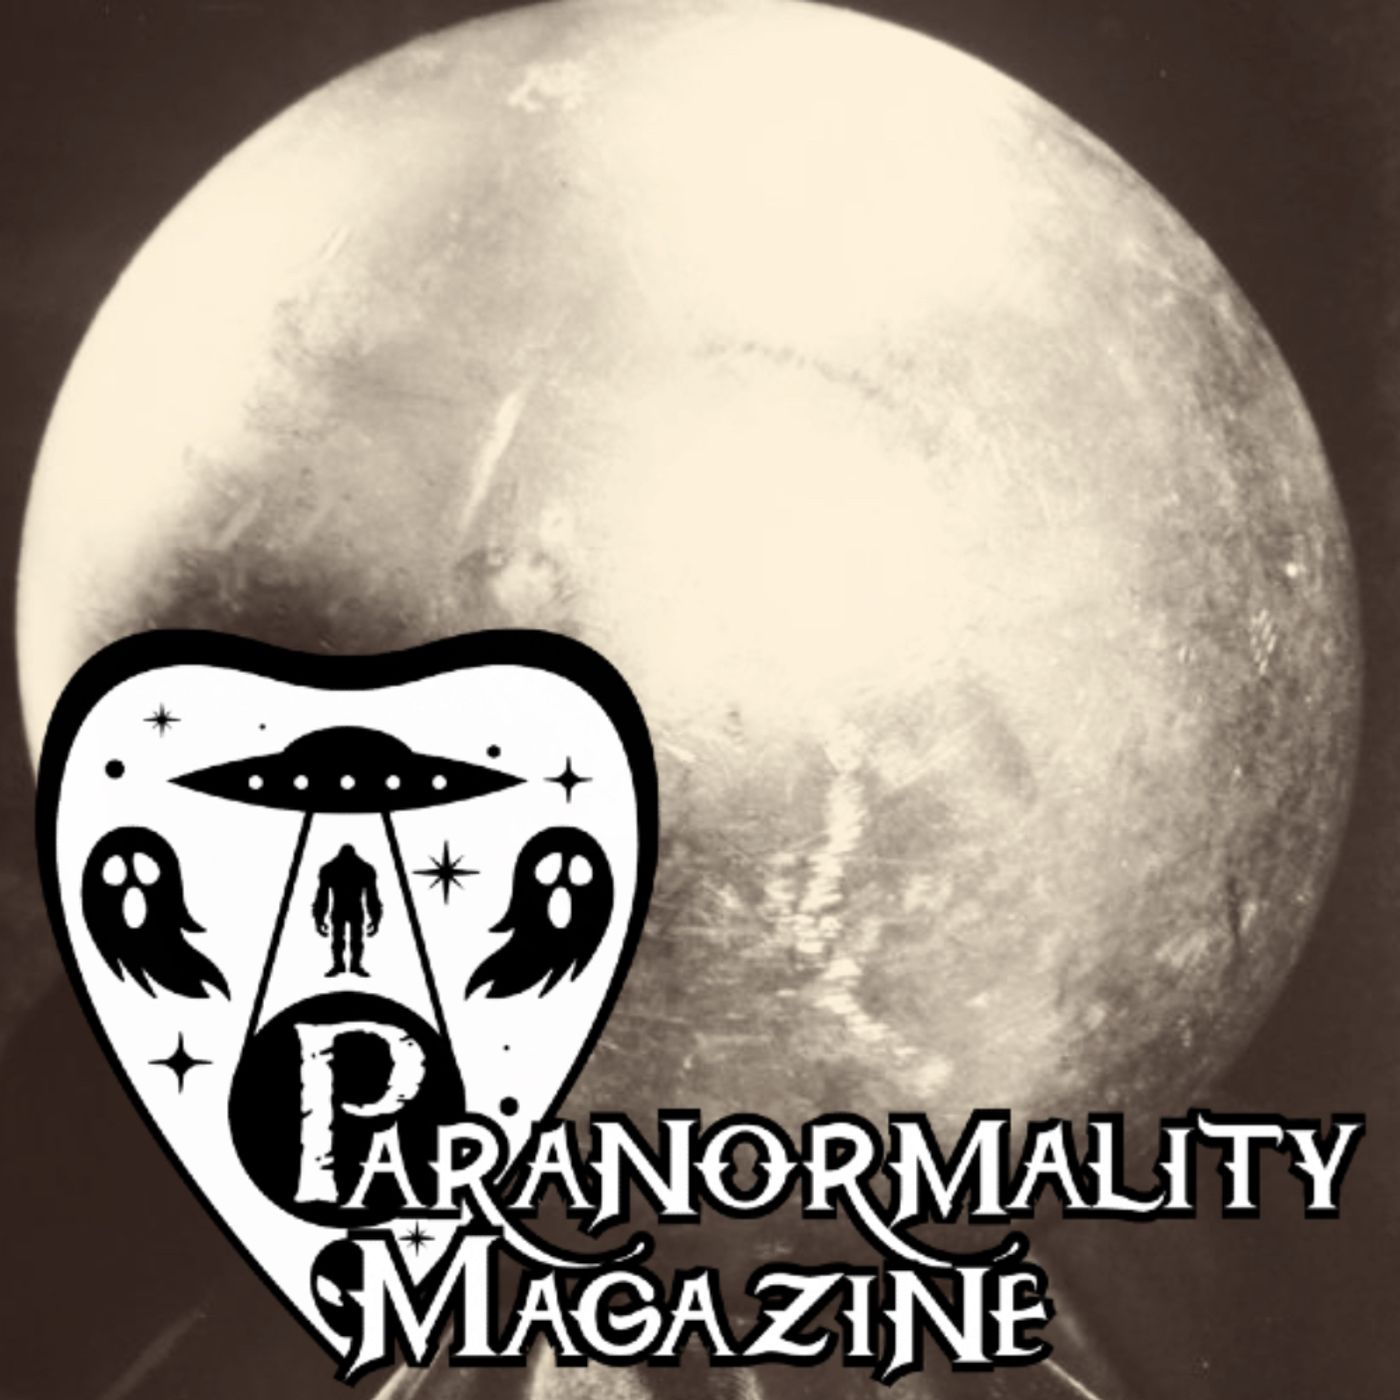 “THE UNEXPLAINED AND BIZARRE BETZ SPHERE” and More Fortean-Related Stories! #ParanormalityMag